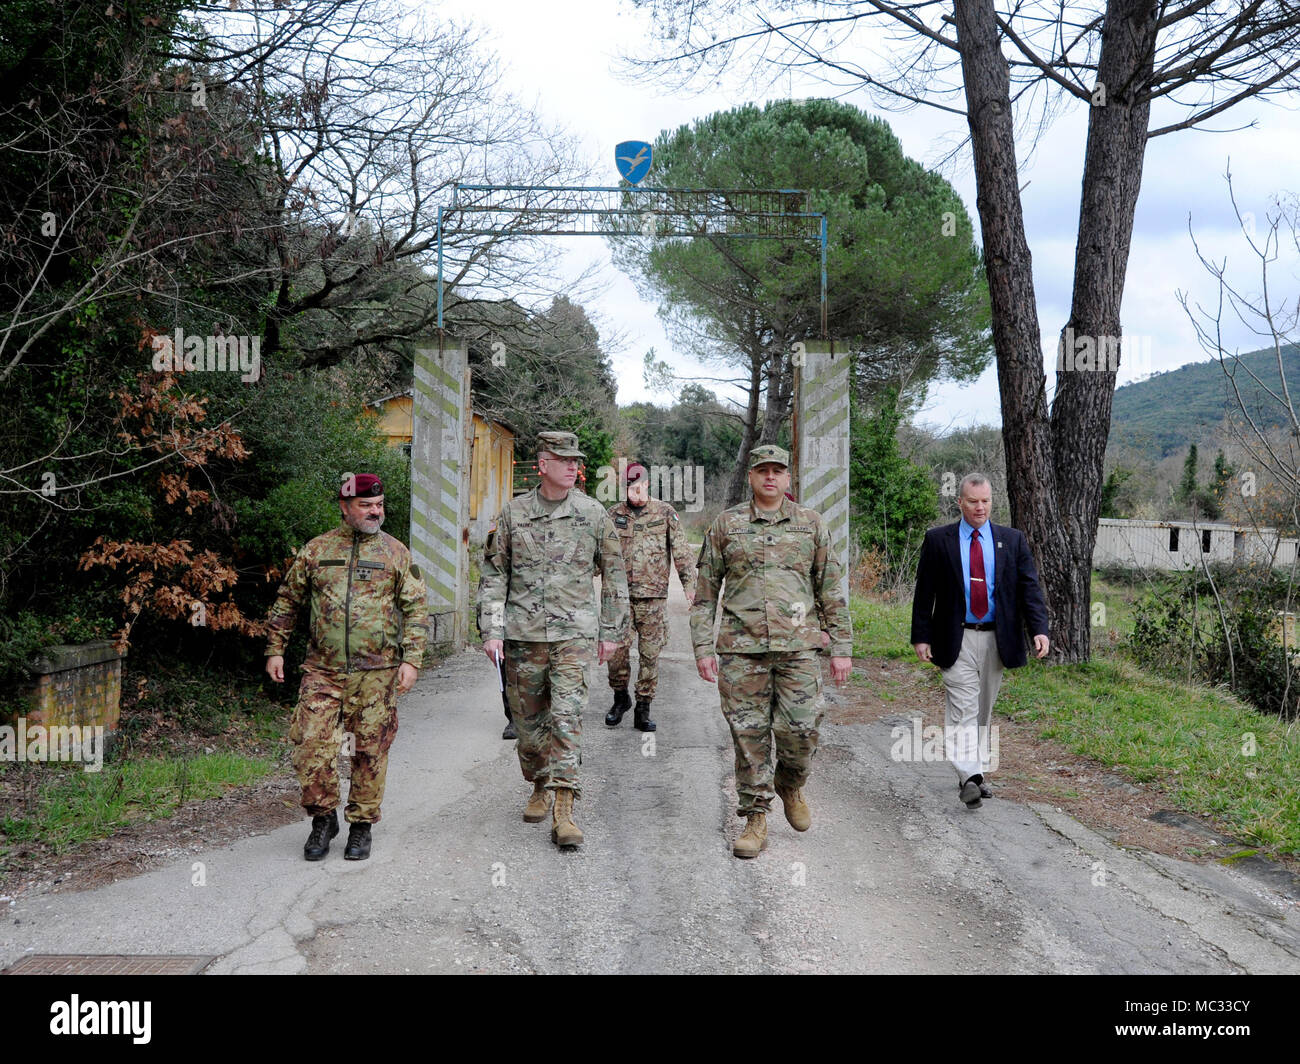 (From left) Italian Army Col. Marco Becherini, Folgore (ABN) Brigade Training Center Commander, U.S. Army Sgt. Maj. Anthony R. Valdez, 7 Army Training Command G-3 Sergeant Major, U.S. Army Lt.Col. Ismael B. Natividad, Training Support Activity Europe (TSAE) Director, and James V. Matheson, Chief Regional Training Support Division South, 7th Army Training Command, during the TSAE Director visit at Valle Ugione Training Area, Livorno, Italy, Jan 30, 2018. (photo by Vincenzo Vitiello/released). Stock Photo